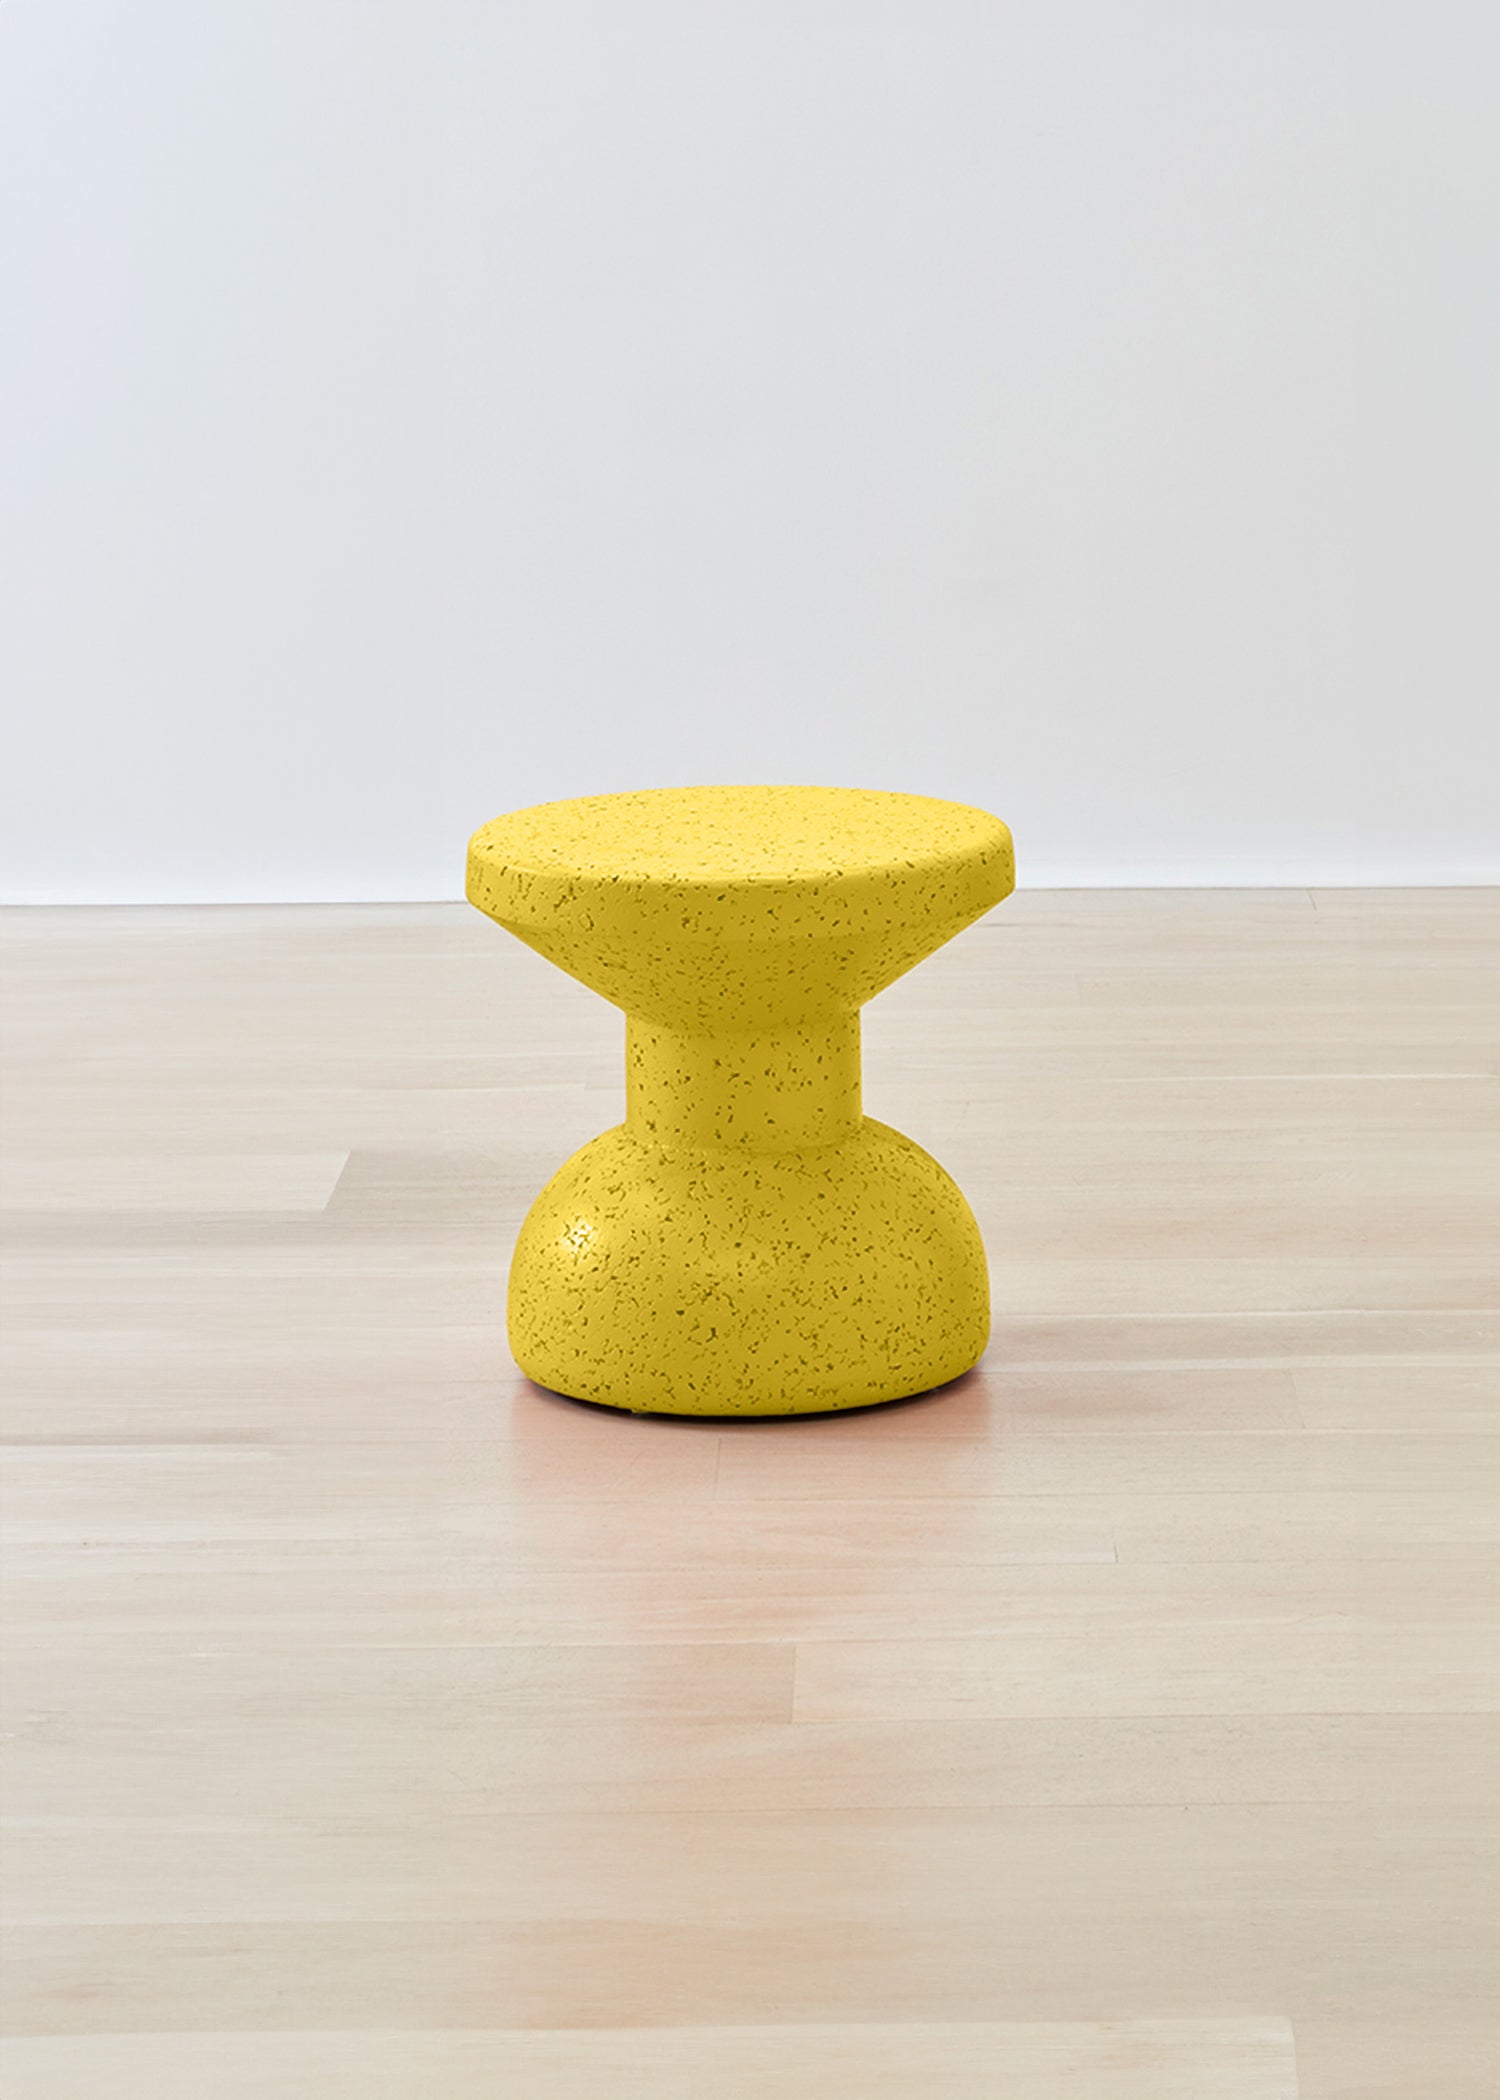 Vivid Kanju African Painted Slim Cork Stool in bright yellow, capturing the essence of sustainable luxury with a sleek design. This handcrafted stool blends vibrant color with the natural texture of cork, offering a stylish, eco-conscious addition to any modern decor.